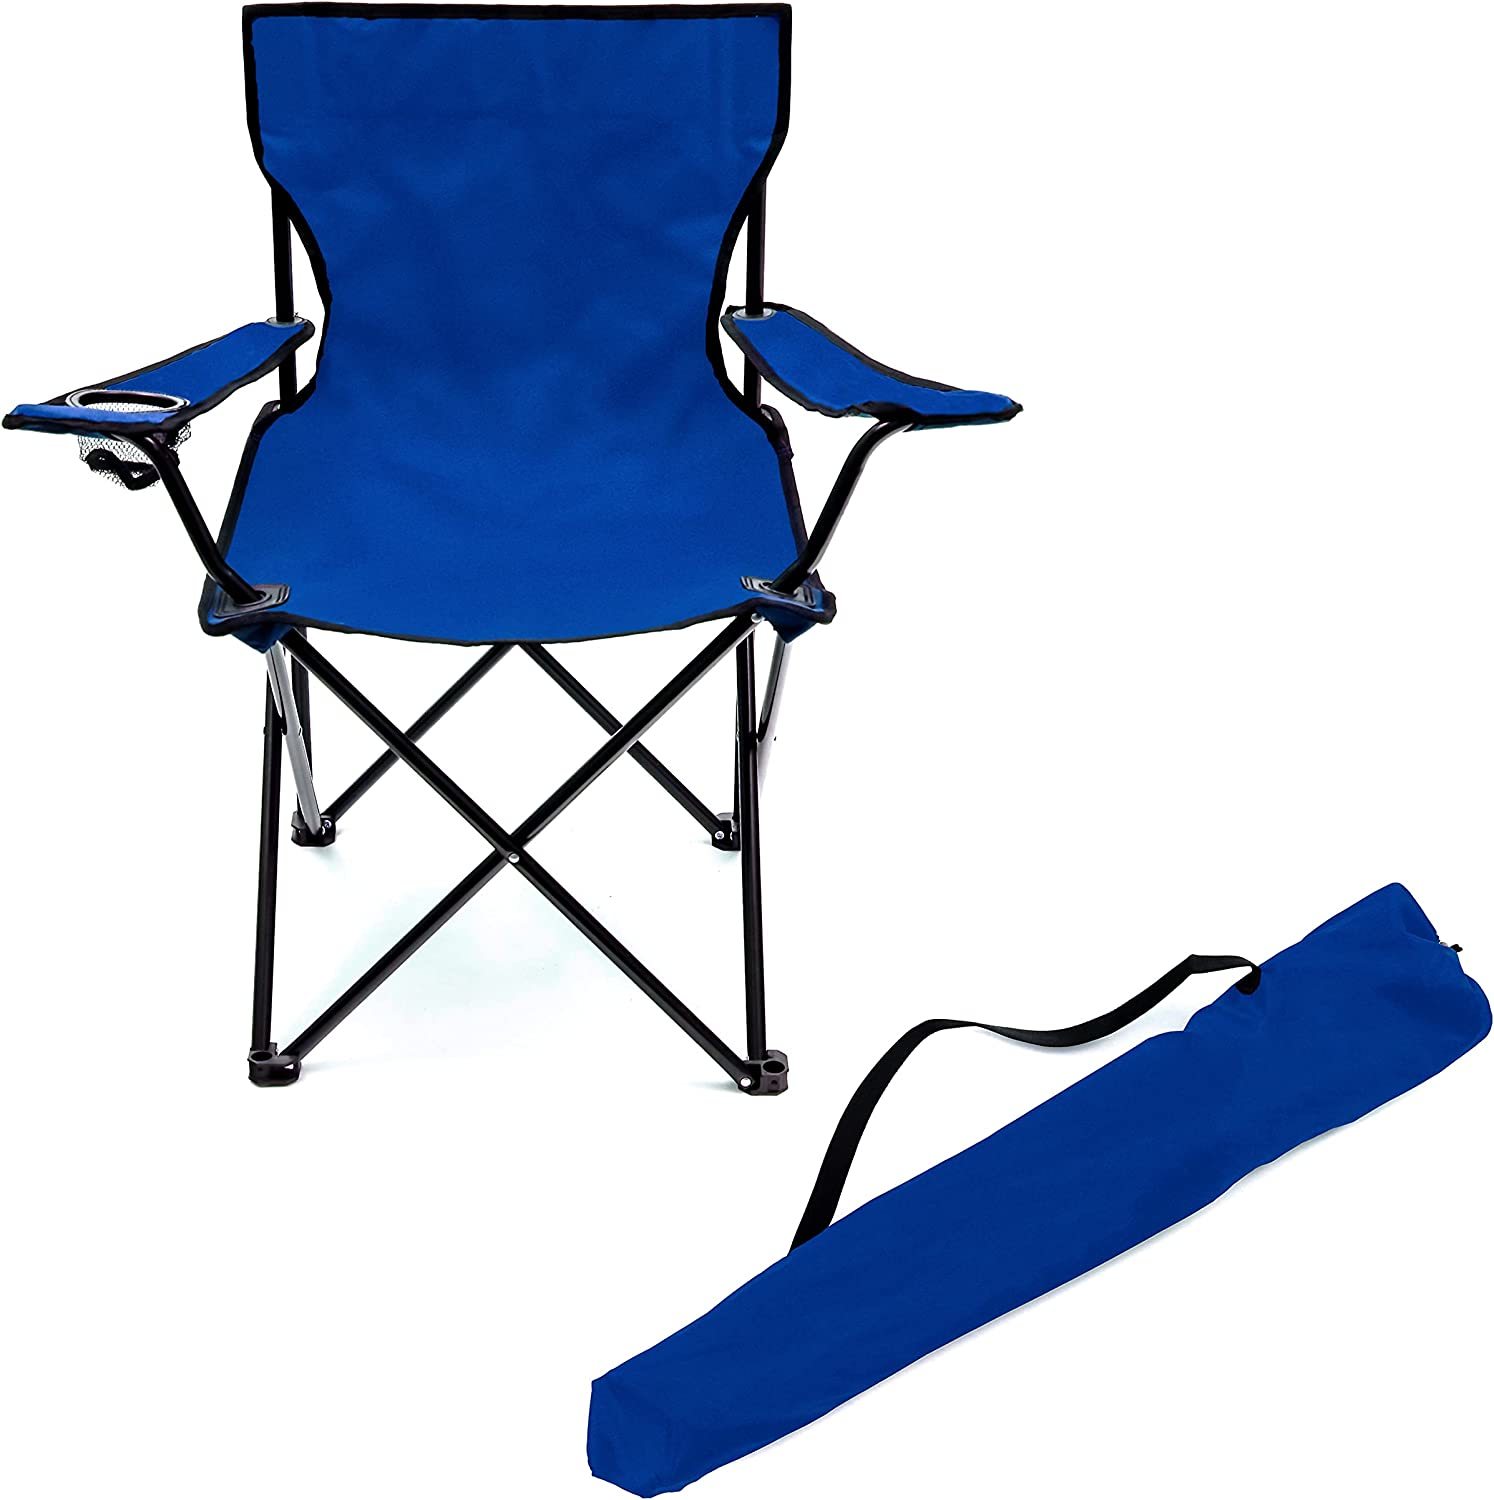 Folding Outdoor Beach Camp Chair From Trademark Innovations, Blue, 19" L X 30" W - $40.96